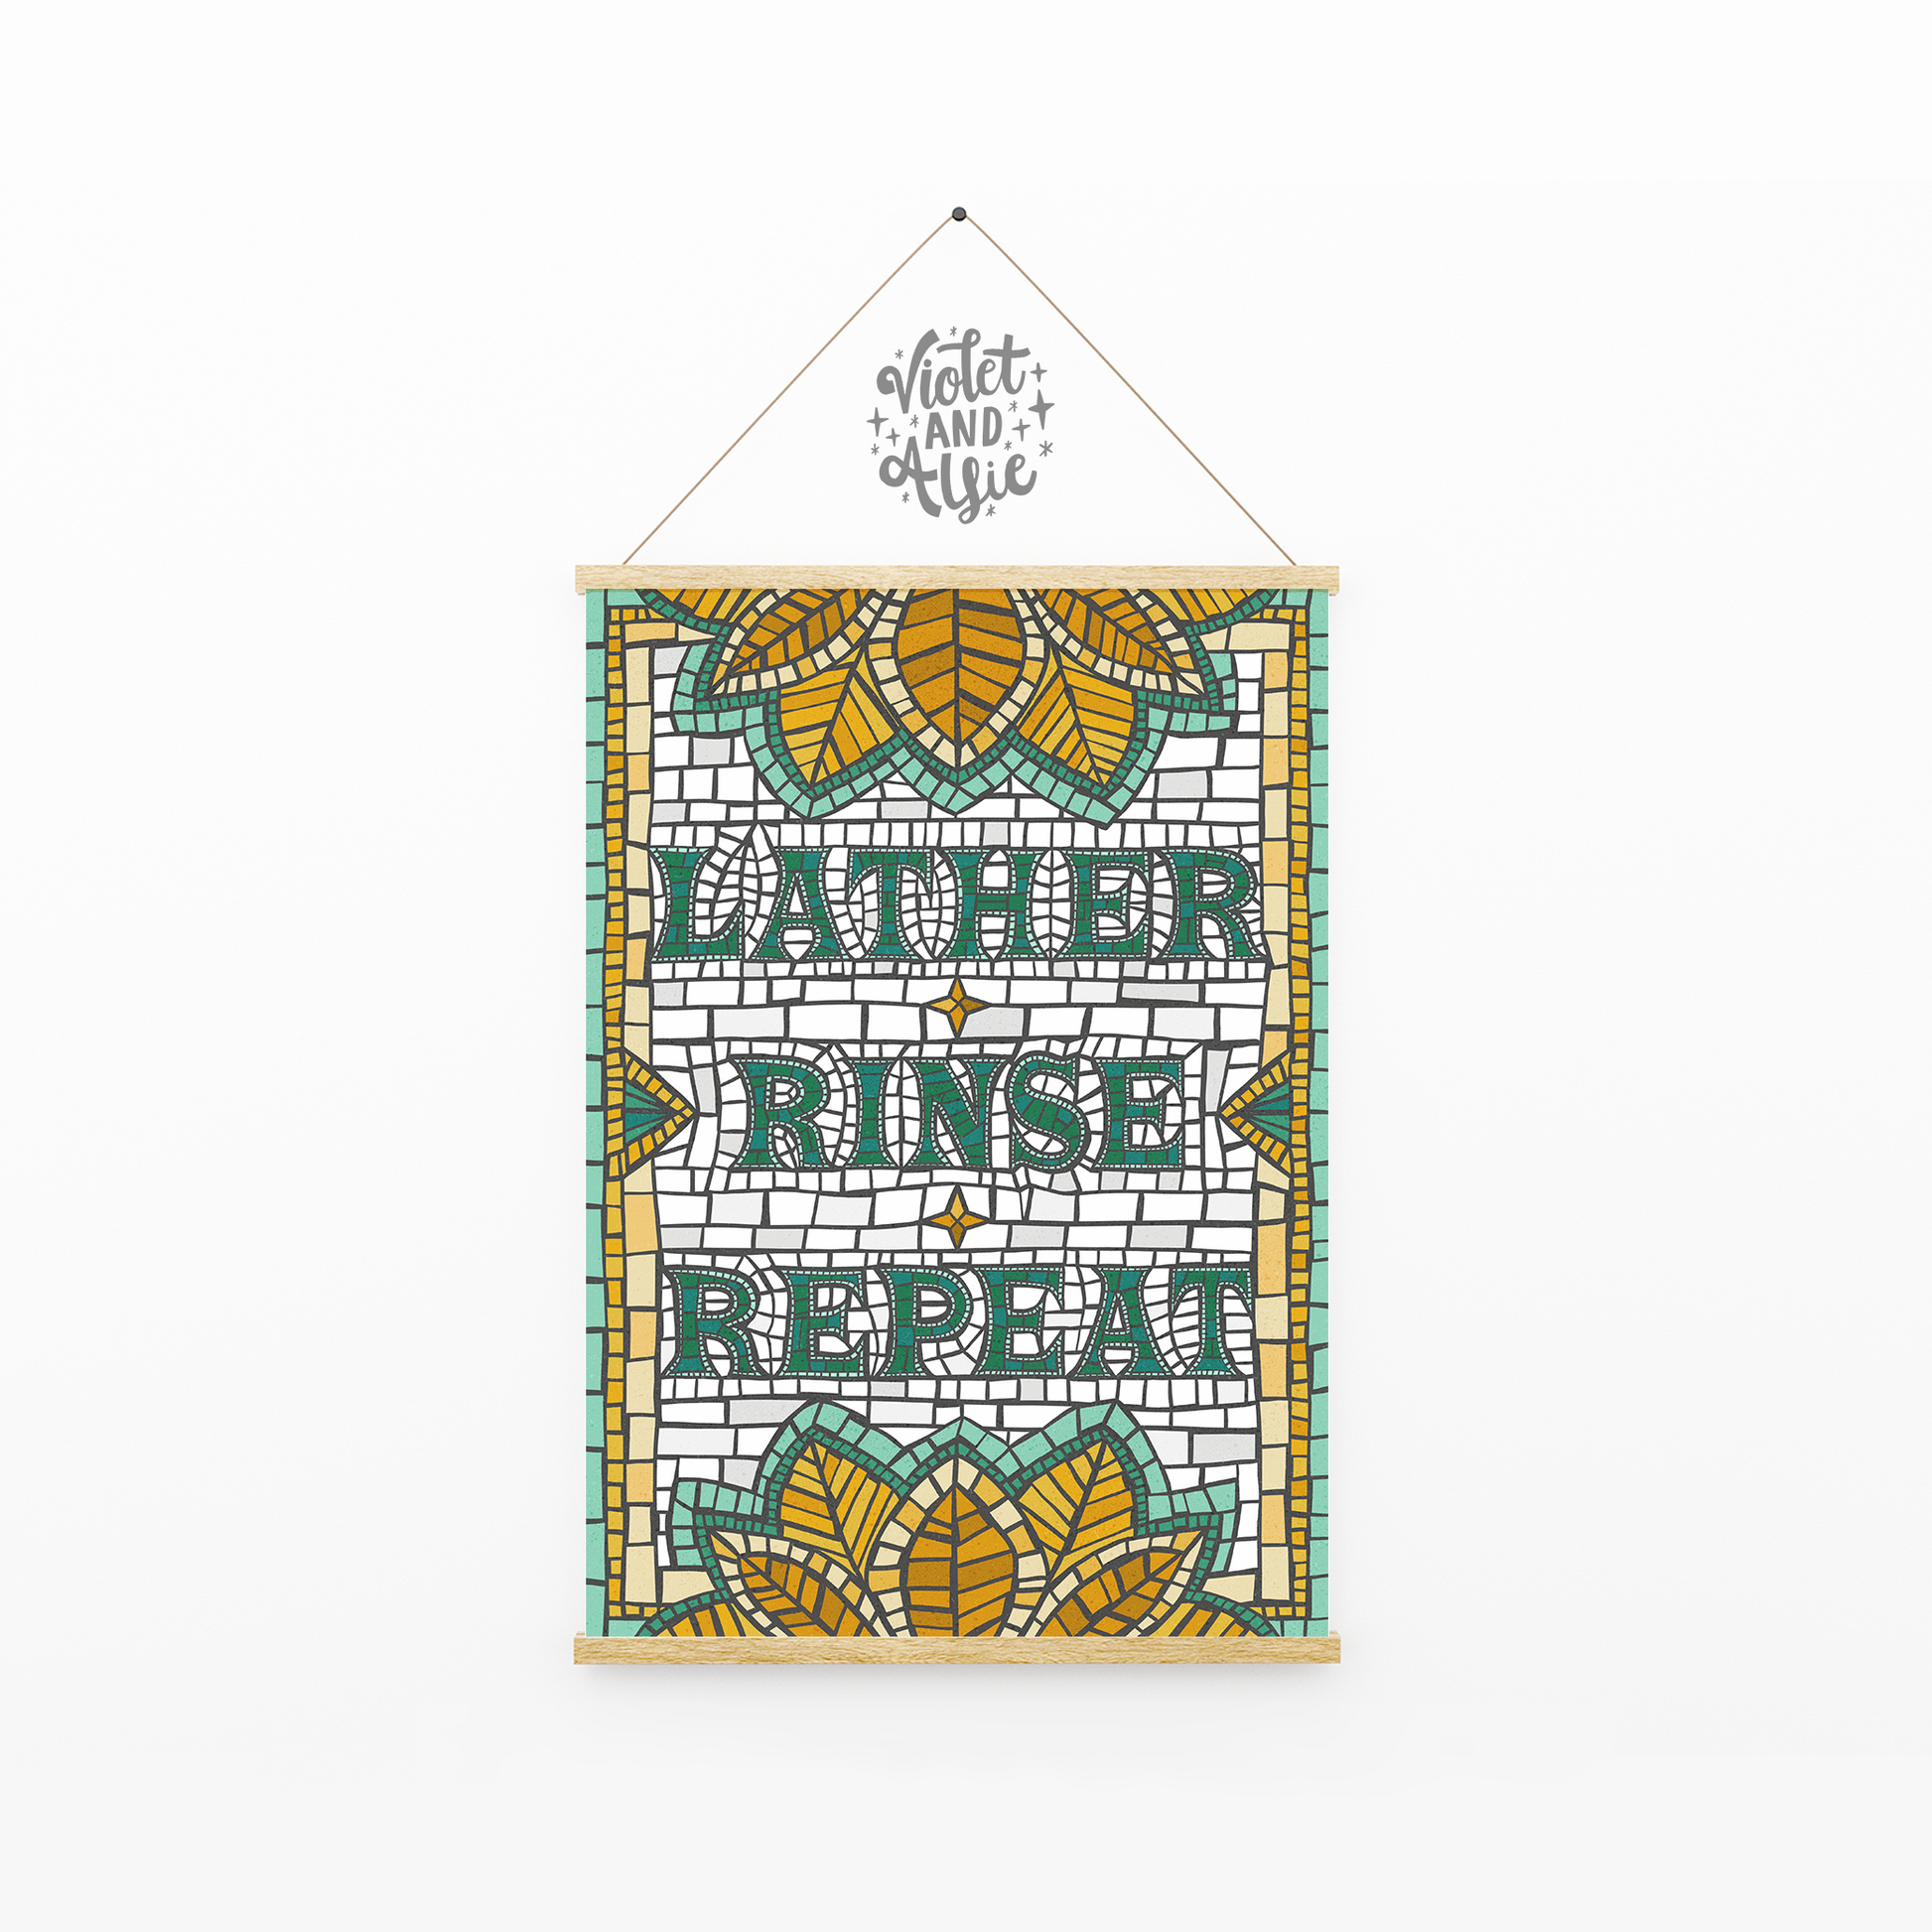 Lather Rinse Repeat This unique bathroom wall art is illustrated in the style of an old mosaic and makes an eye-catching addition to any eclectic bathroom or shower room decor. Lather Rinse Repeat Print, Eclectic Bathroom Decor, Unique Wall Art for bathroom, vintage tiles aesthetic, Boho bathroom, colourful bathroom art, prints for bathroom